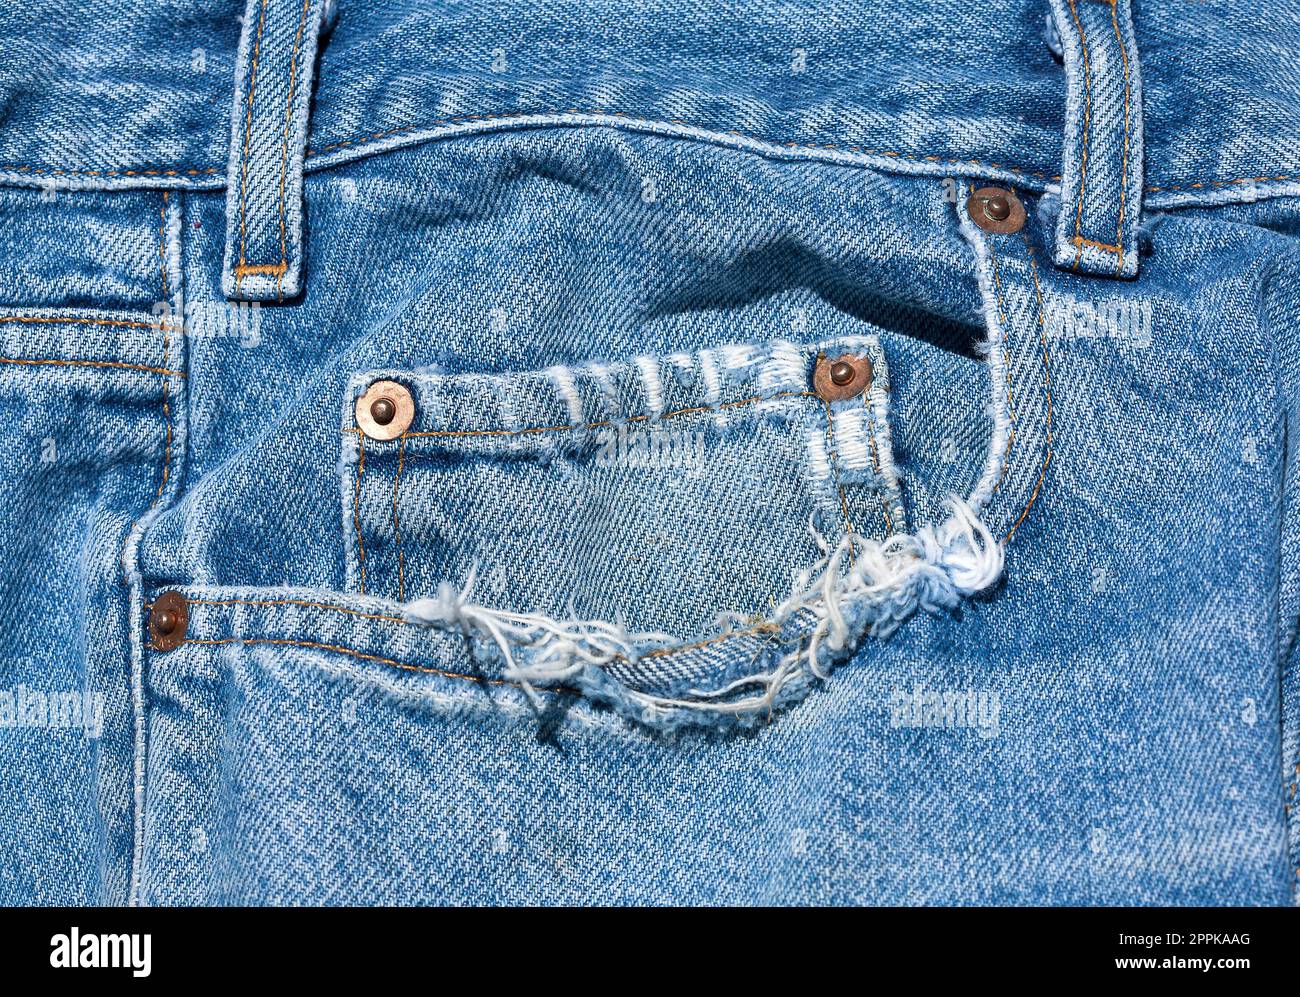 An old worn pair of blue jeans. Stock Photo